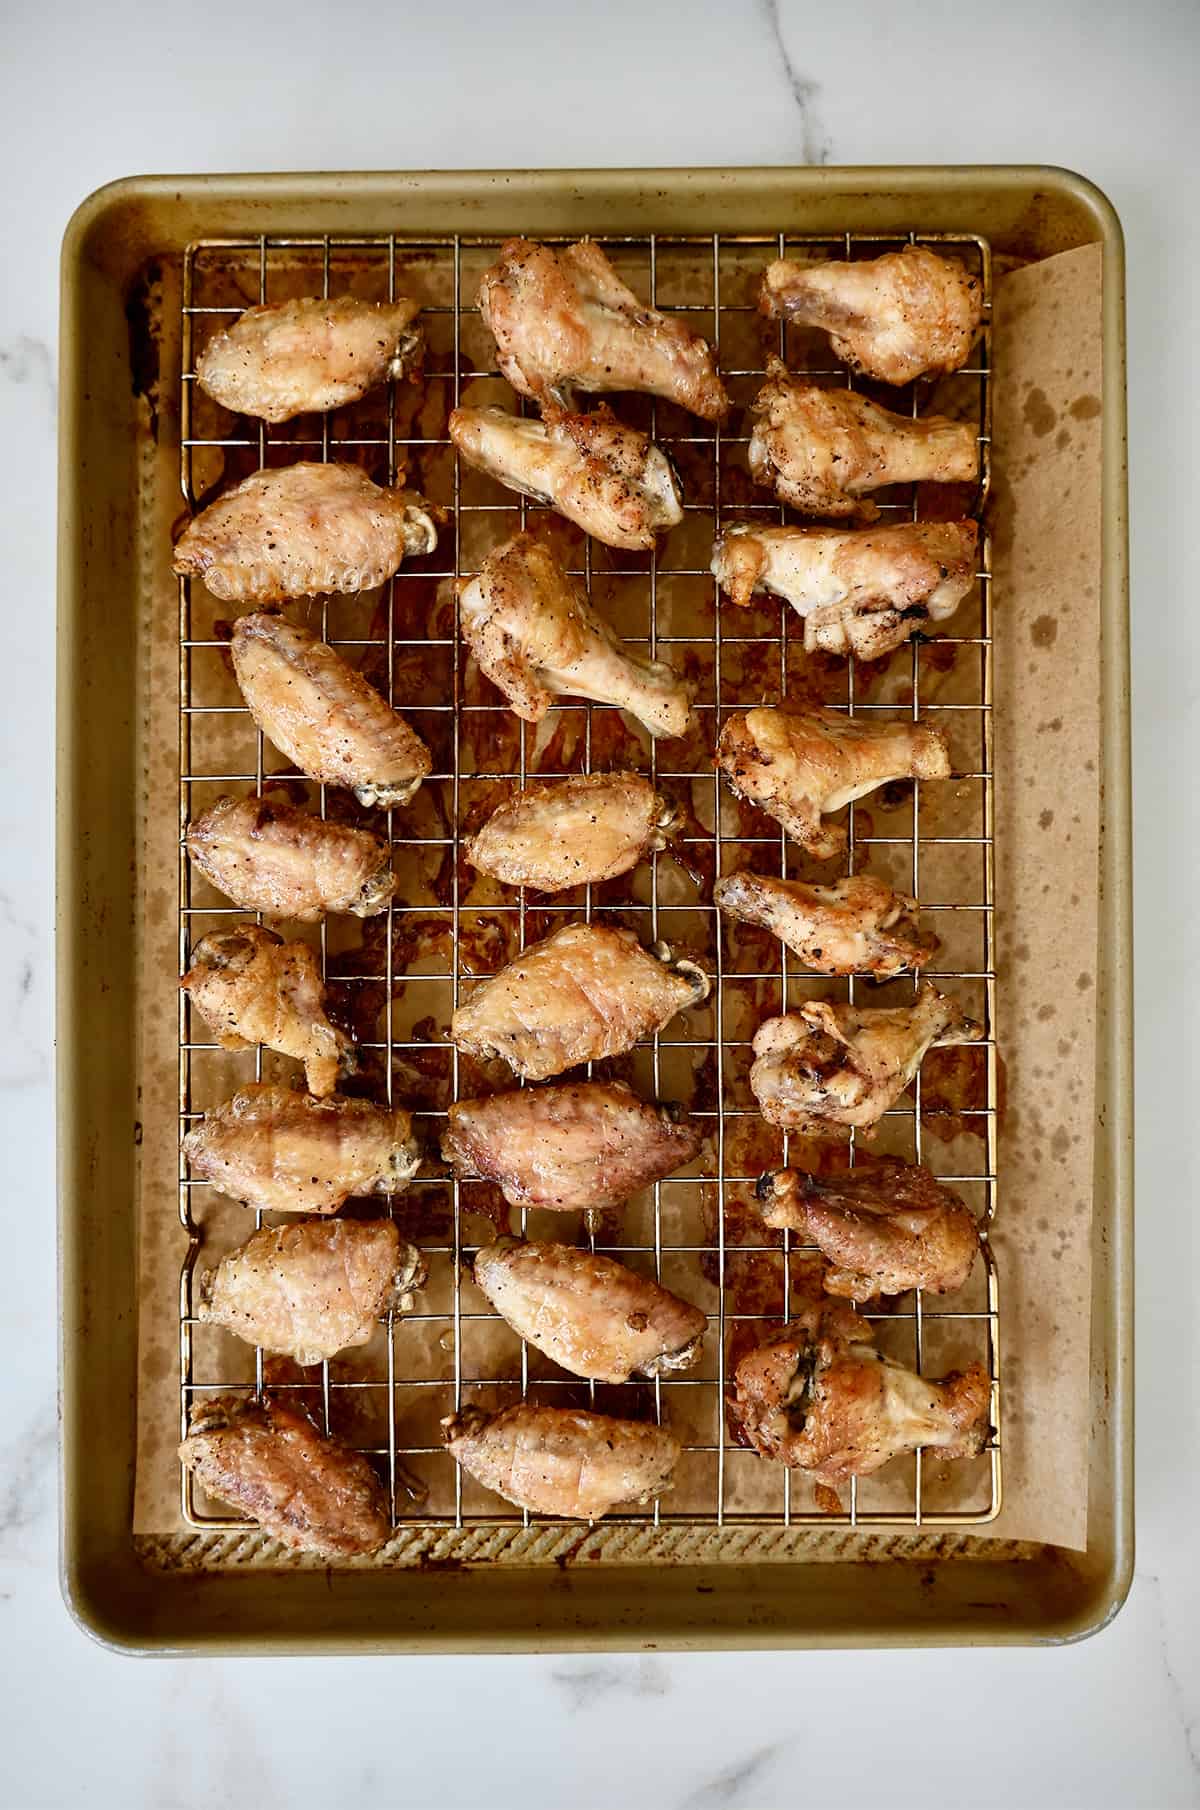 Crispy baked wings on a baking rack atop a rimmed baking sheet lined with parchment paper.